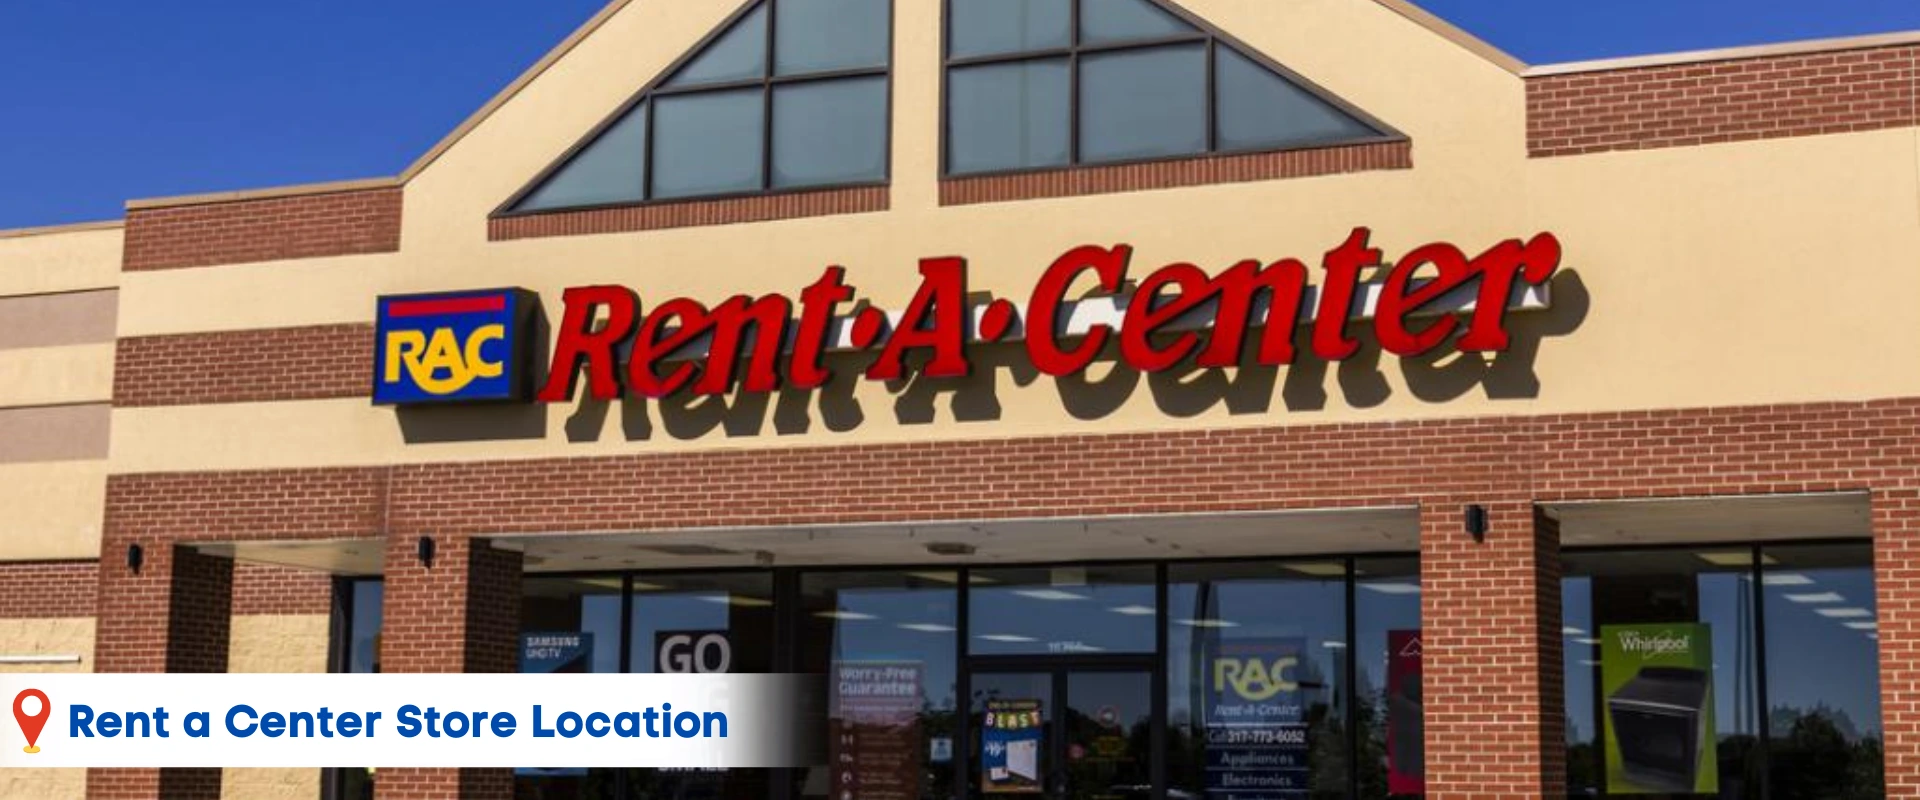 Rent a Center Near Me in Easton, PA.